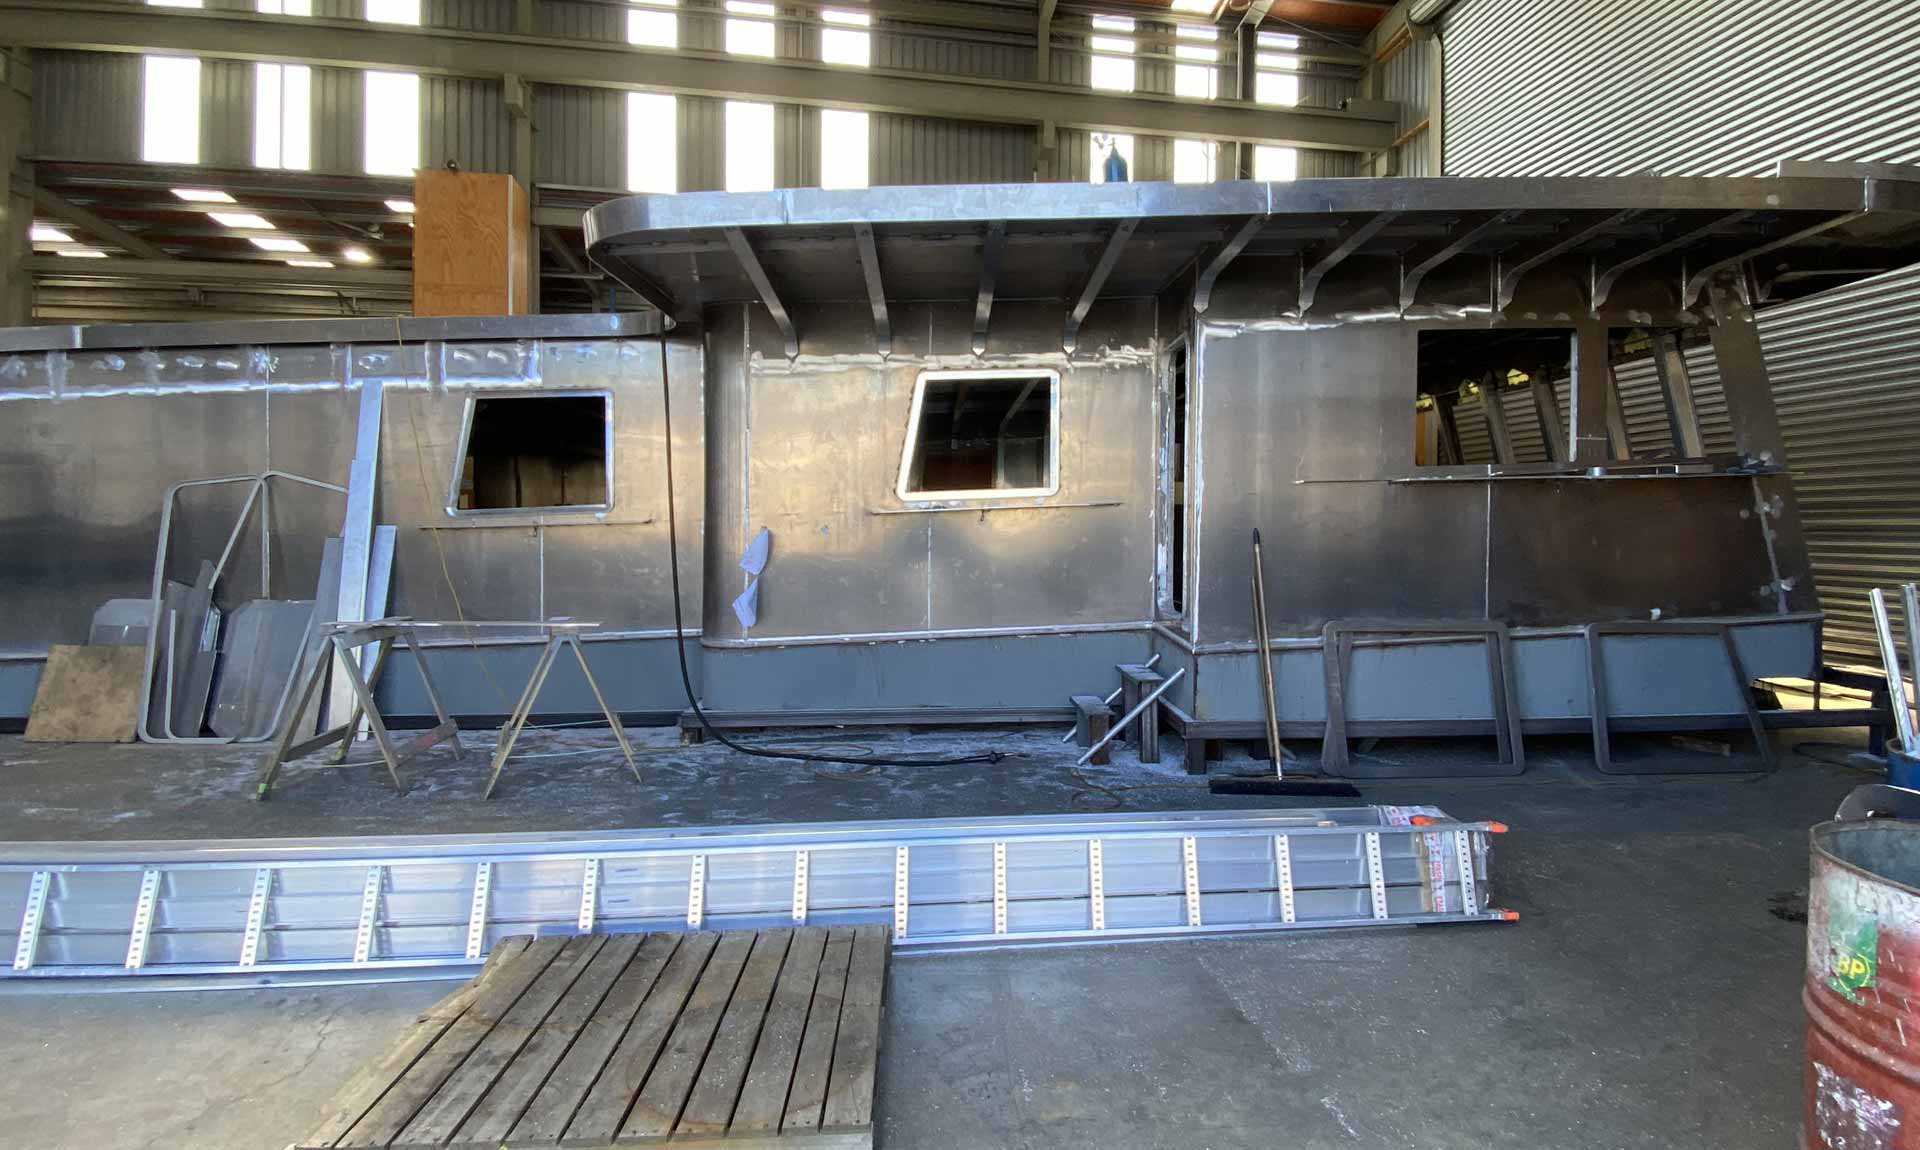 A new wheelhouse was fabricated in our workshops